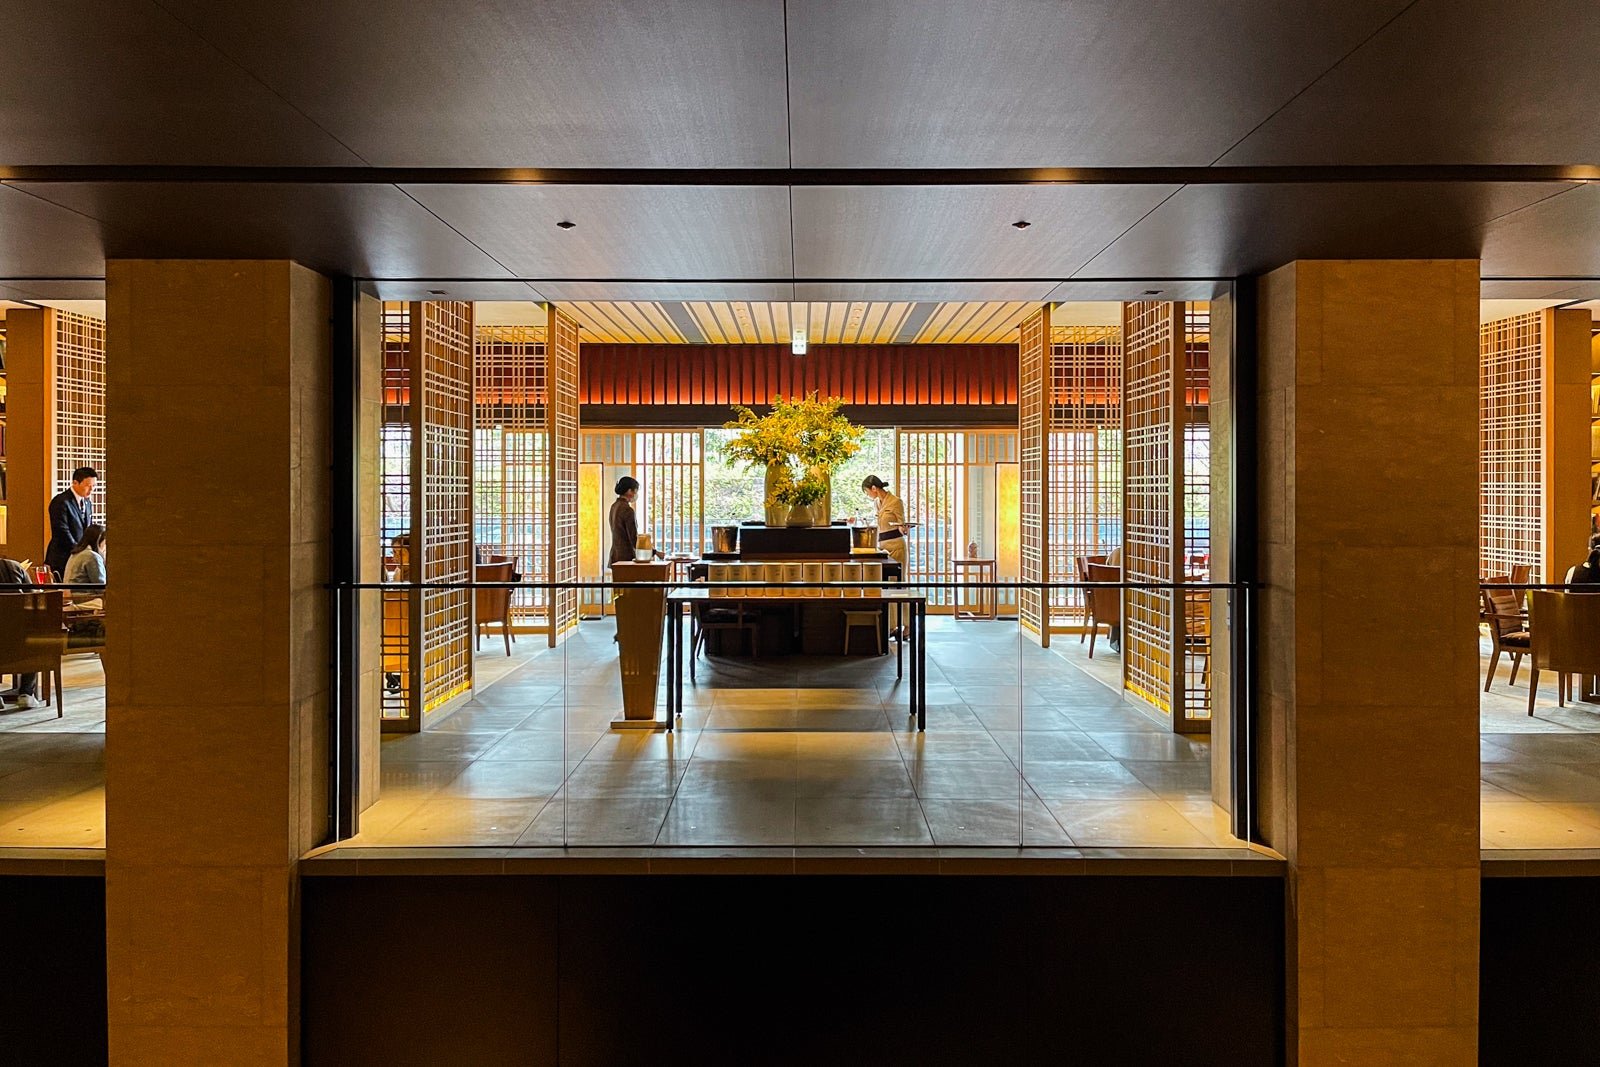 The Ritz-Carlton, Kyoto: Polished service redeems its so-so location